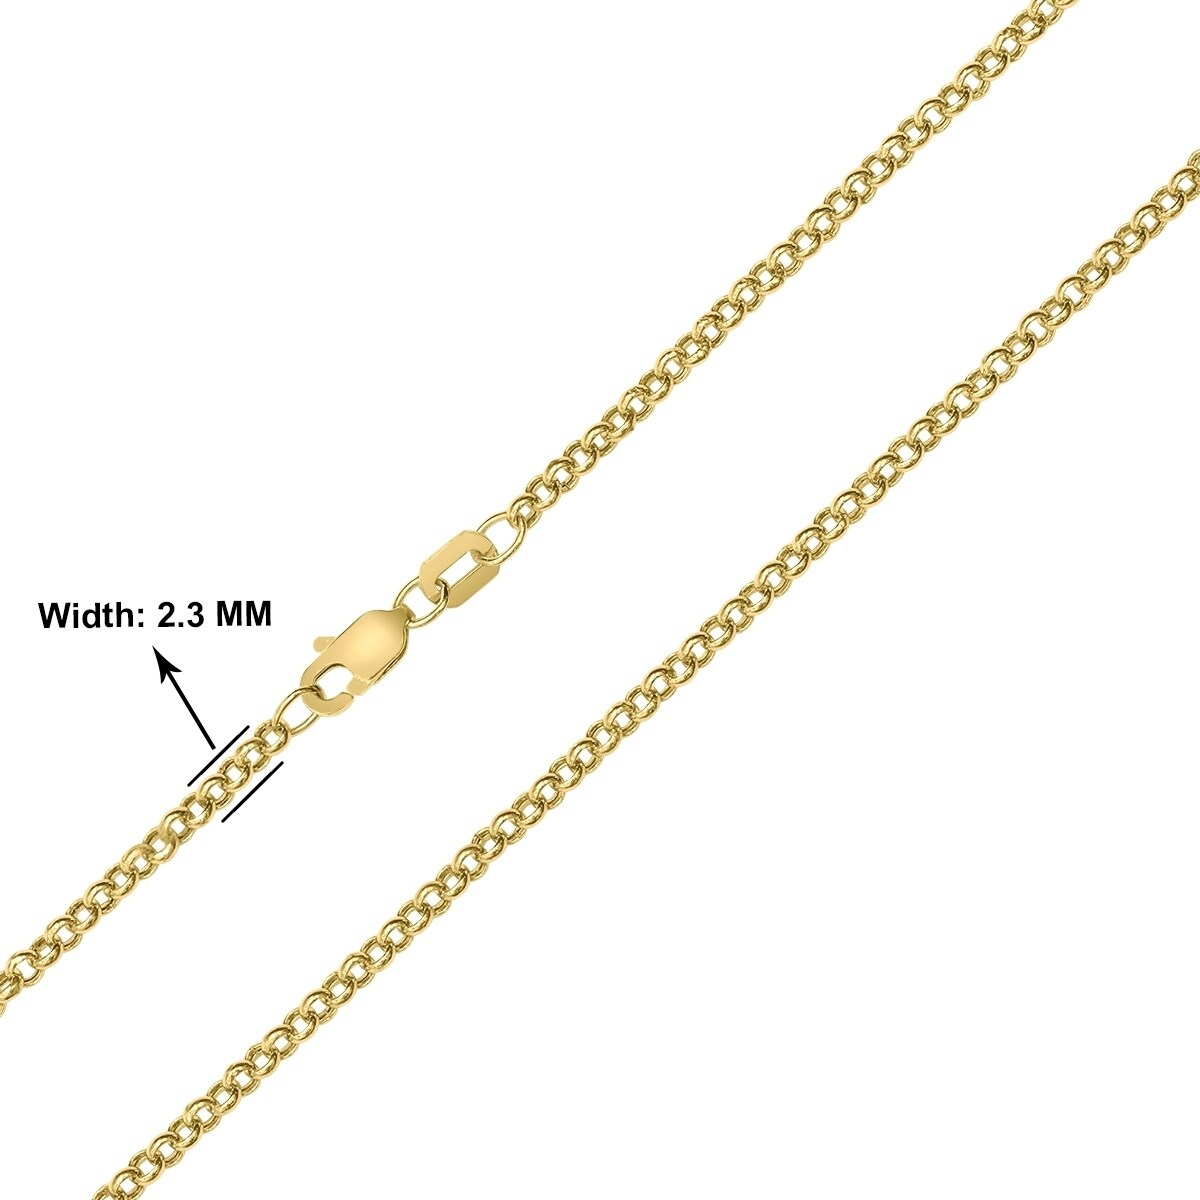 Solid 14k Yellow Gold 1.5 mm Diamond-Cut Rolo Chain Necklace with Secure Lobster Lock Clasp